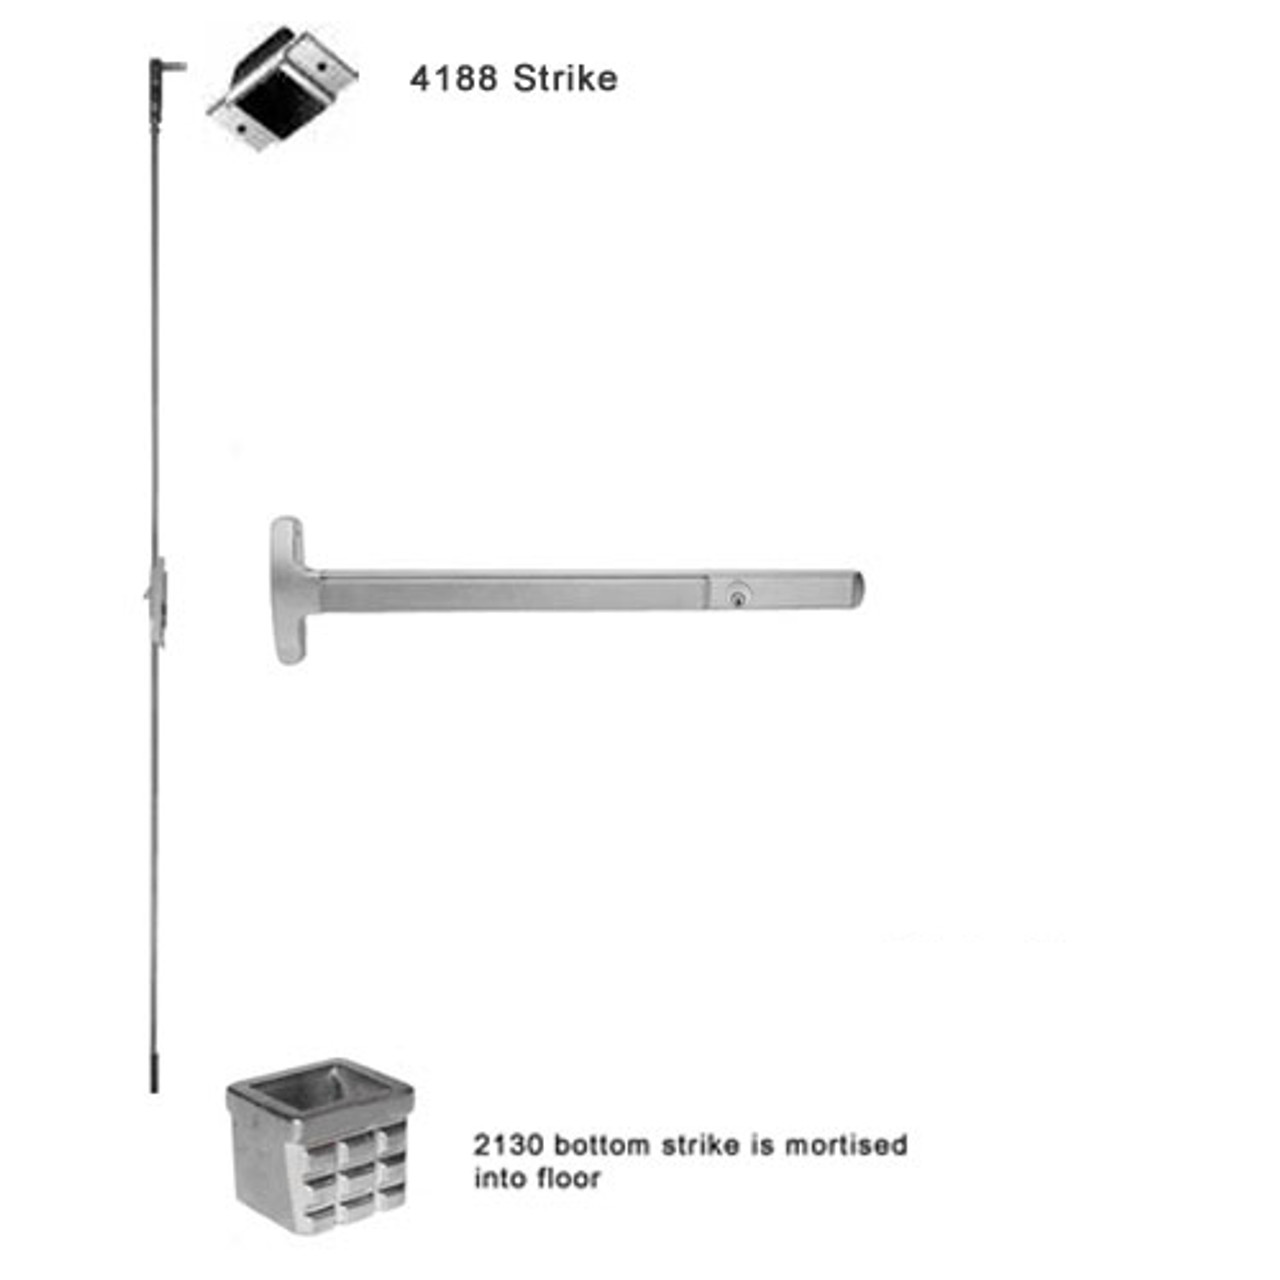 CD24-C-L-DANE-US32-4-LHR Falcon 24 Series Concealed Vertical Rod Device with 712L Dane Lever Trim in Polished Stainless Steel